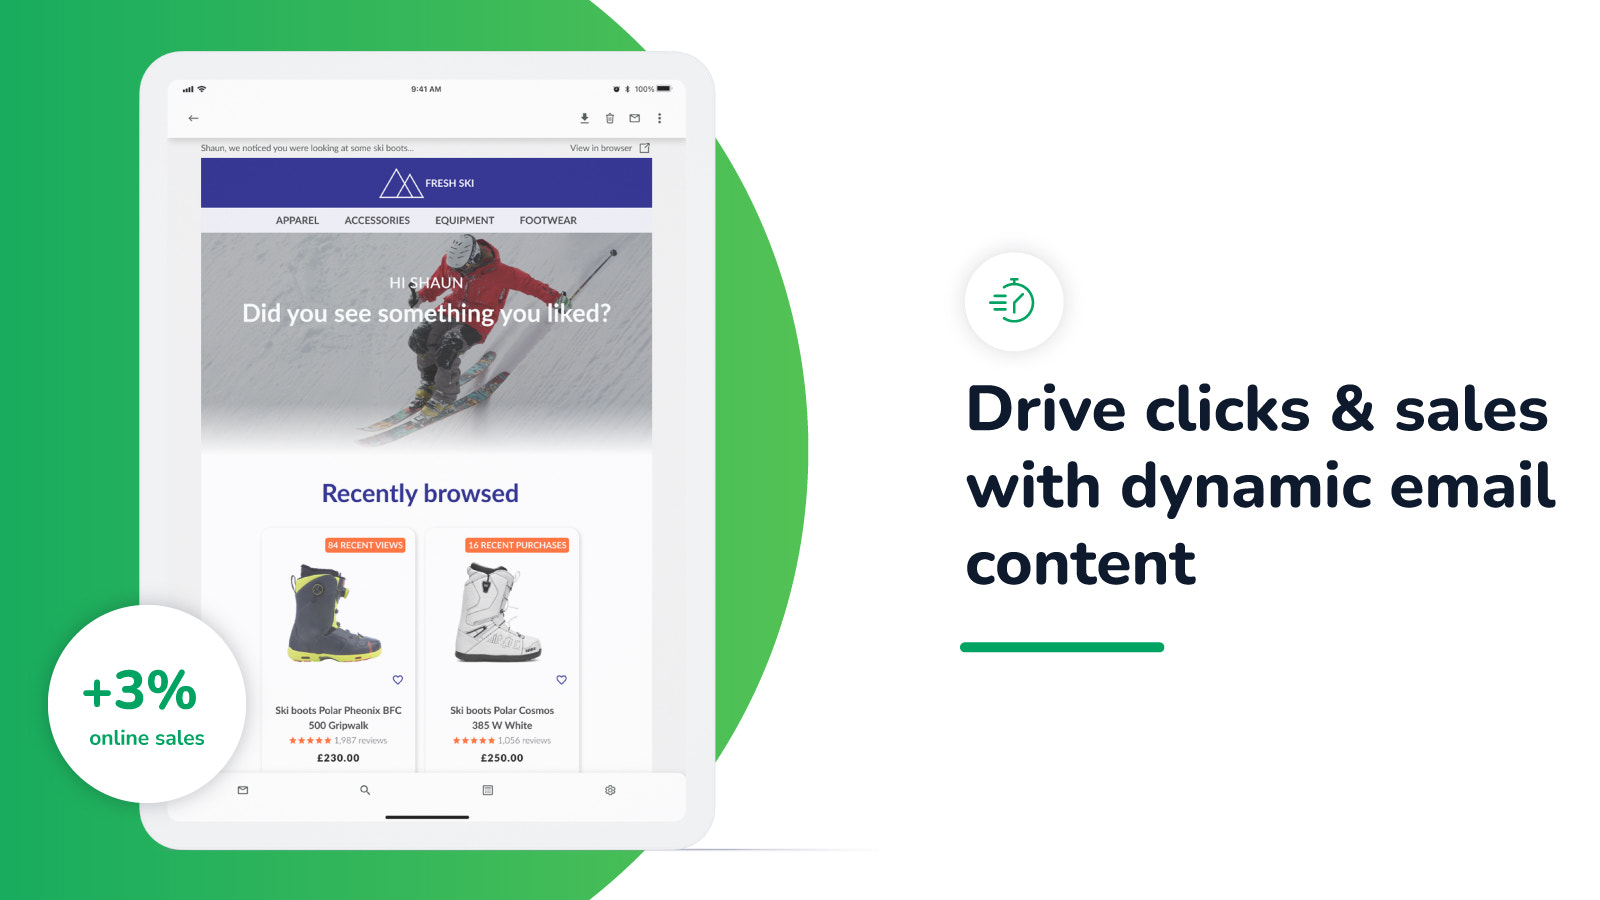 Drive clicks & sales with dynamic email content